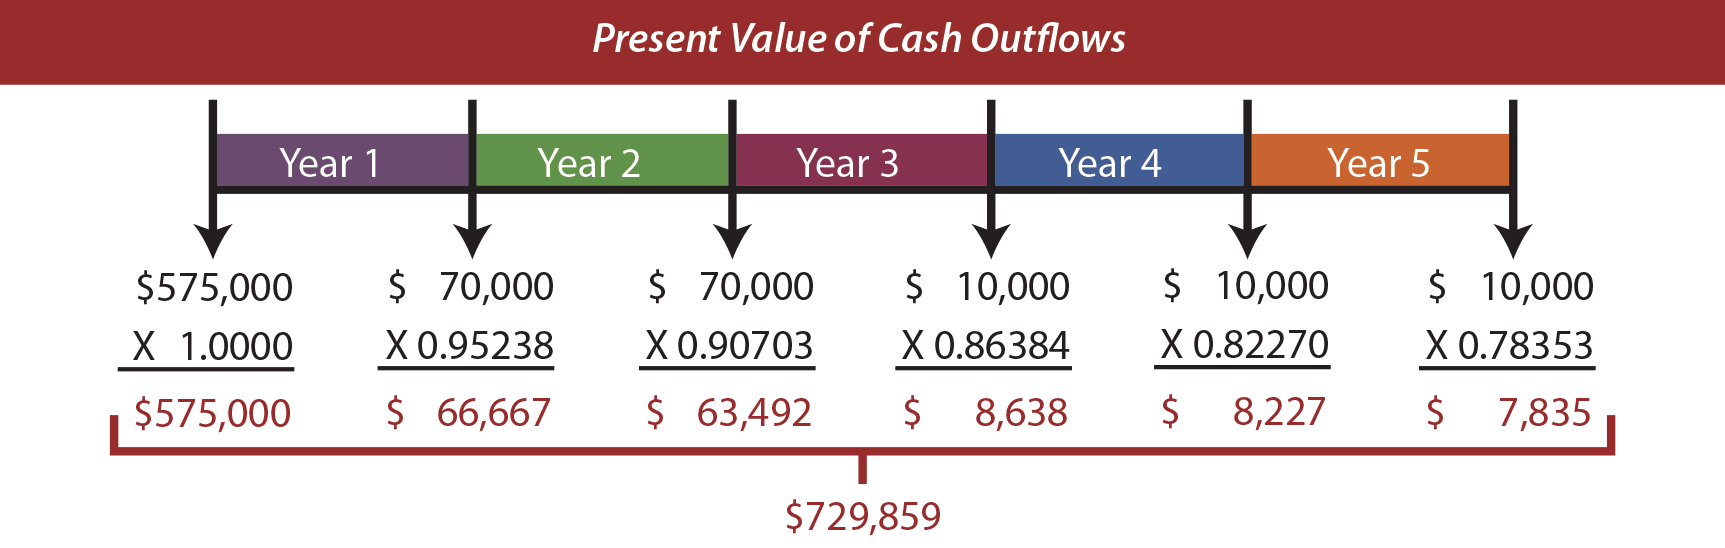 Present Value of Cash Outflows Illustration